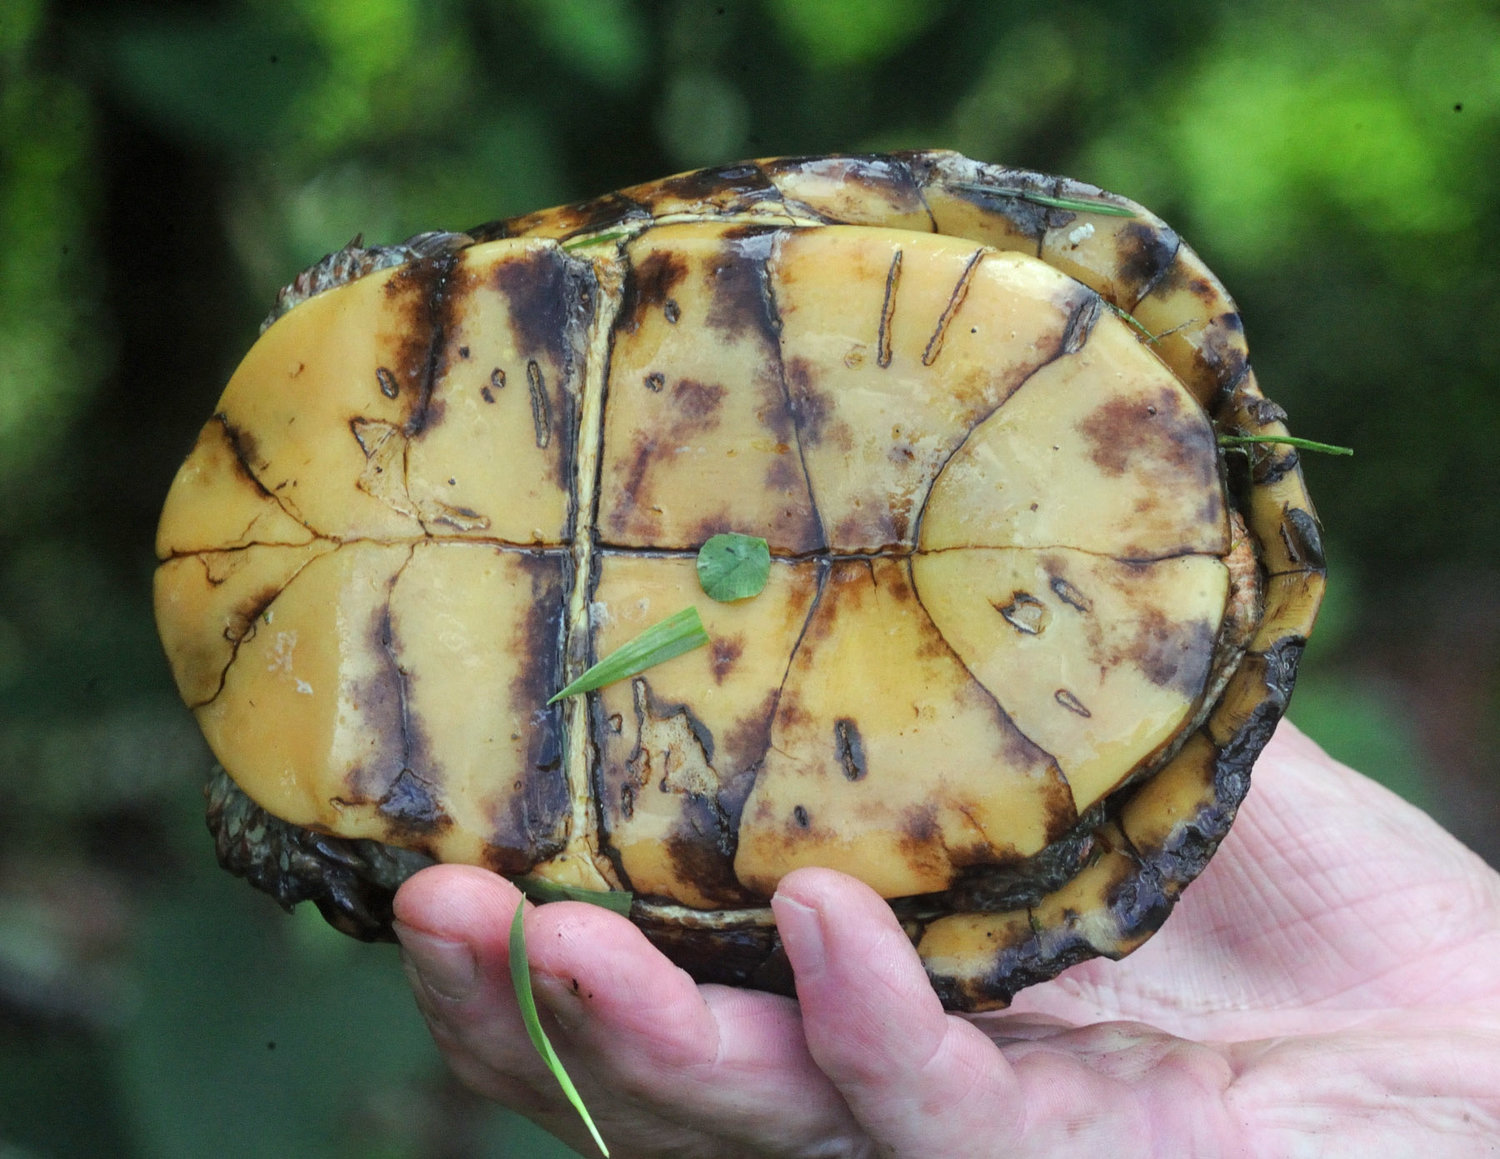 This turtle is probably an older animal with a few chips and wear marks on both top and bottom. The annular rings on the scutes of the carapace are normally a good way to age this species, but on this turtle, they were worn smooth. Shown here, where the blade of grass is stuck to the plastron, is the hinge that enables the turtle to protect its head and forelegs.